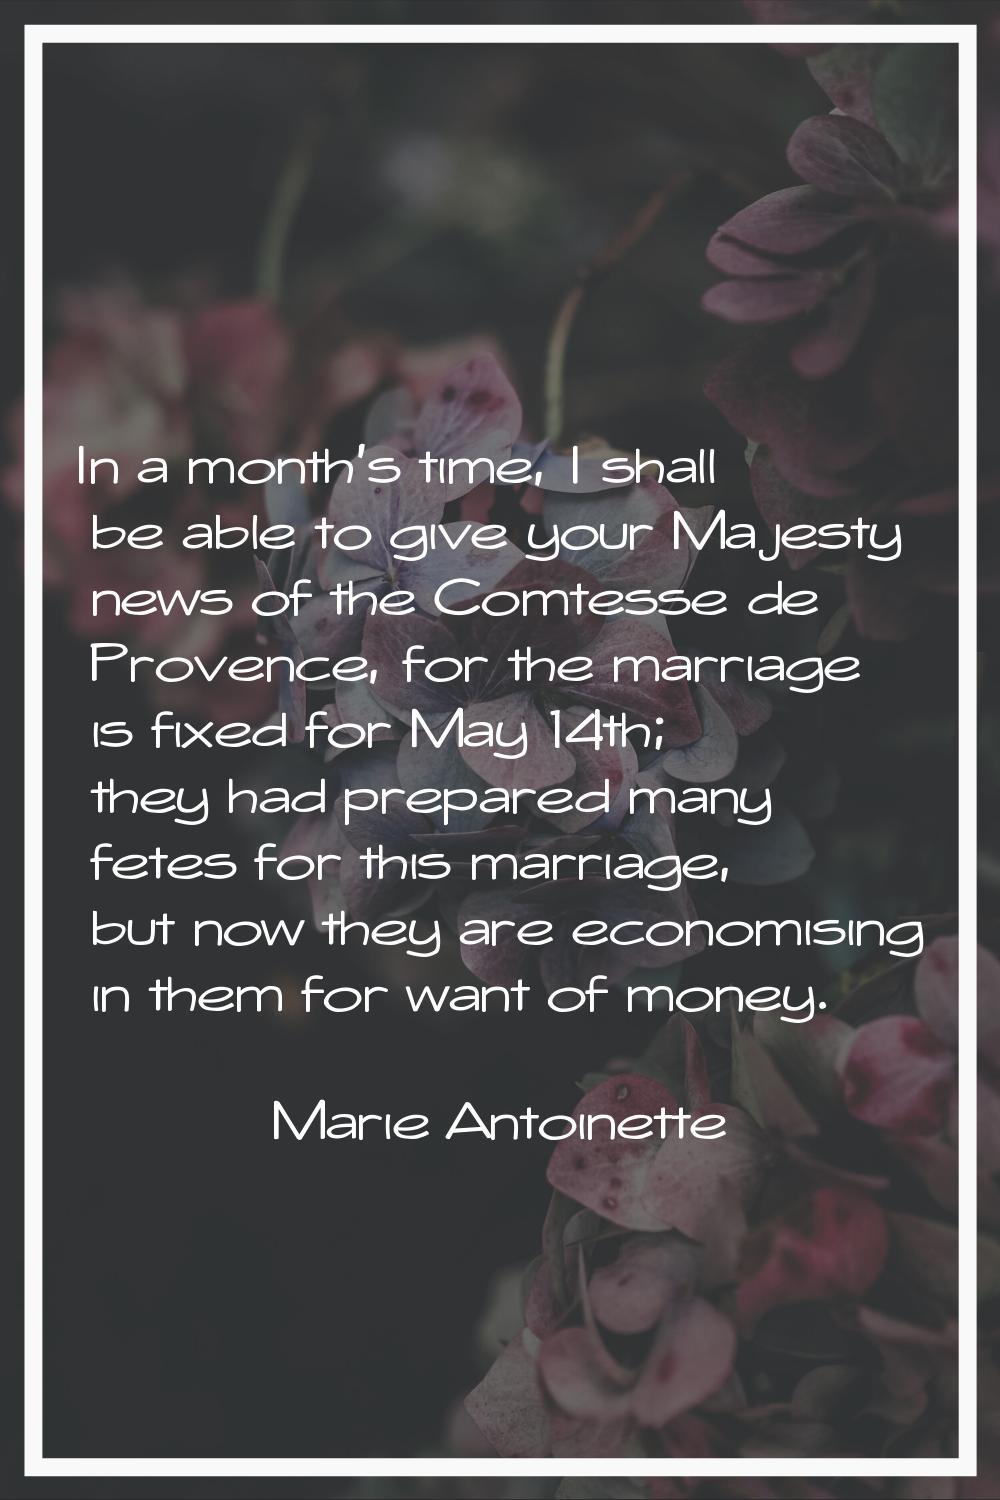 In a month's time, I shall be able to give your Majesty news of the Comtesse de Provence, for the m